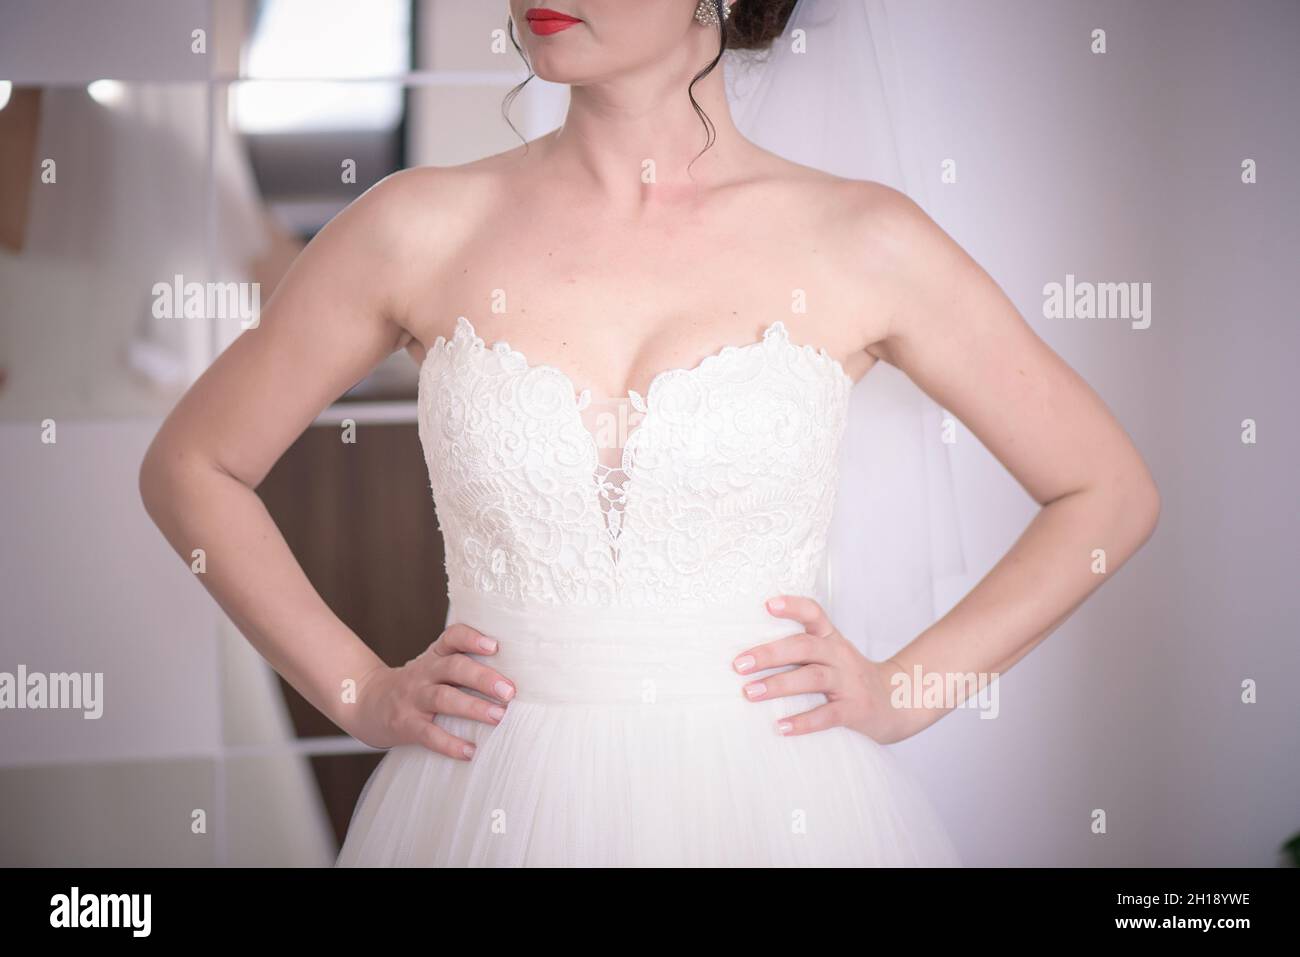 Cropped semi-profile shot of a Caucasian woman wearing a red hot lipstick and a bridal sweetheart neckline dress while holding hands on the waistline Stock Photo